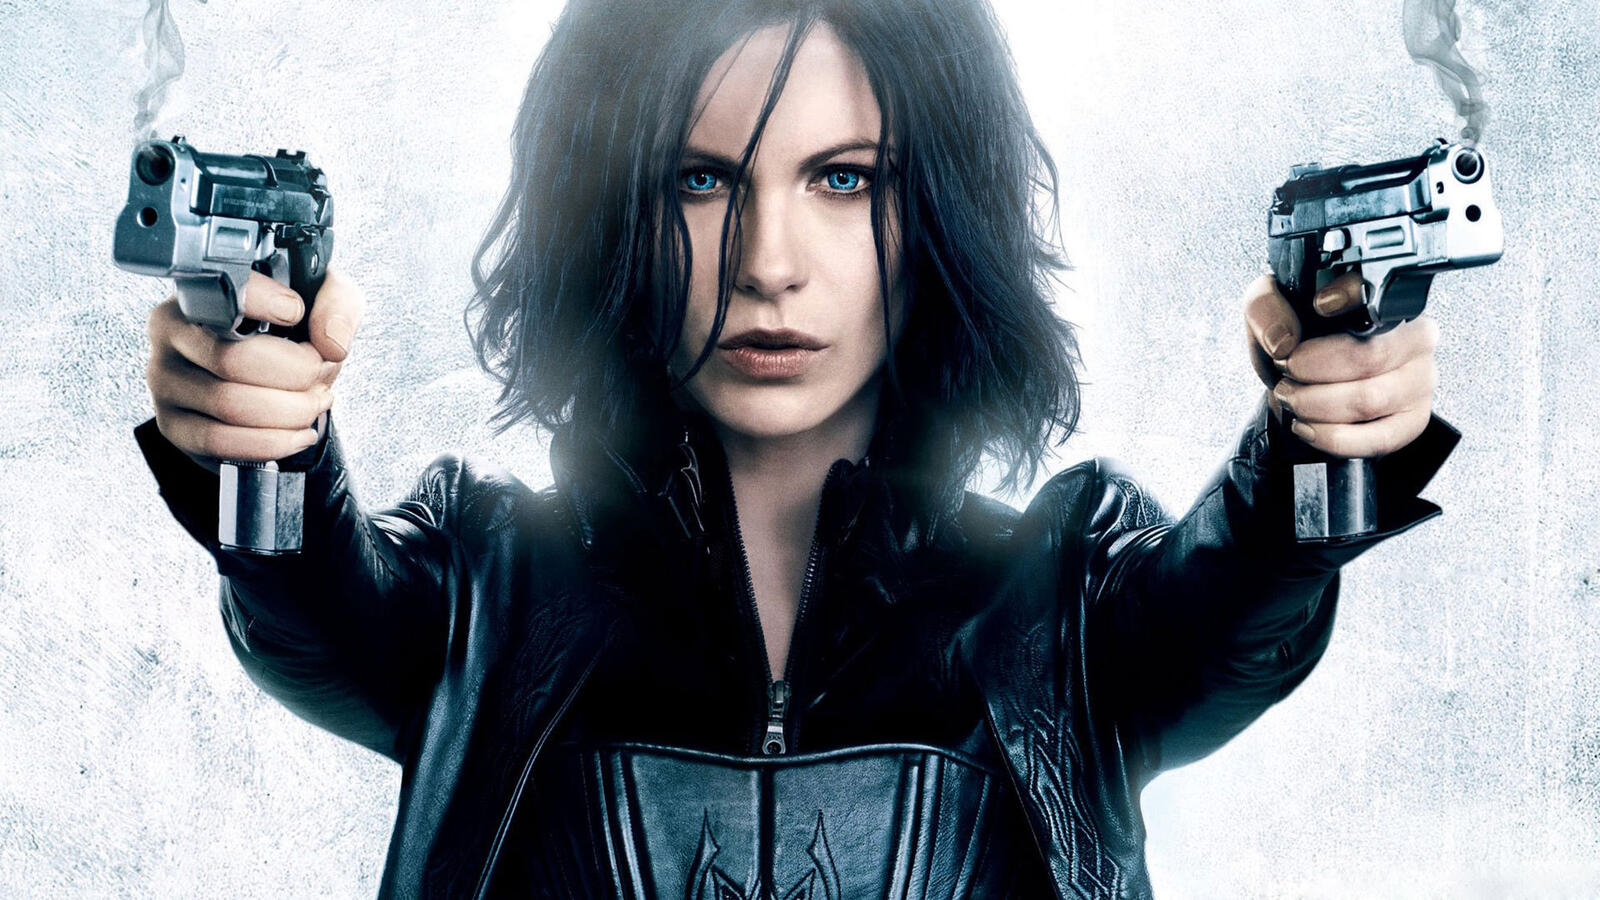 Wallpapers another world kate beckinsale vampire on the desktop